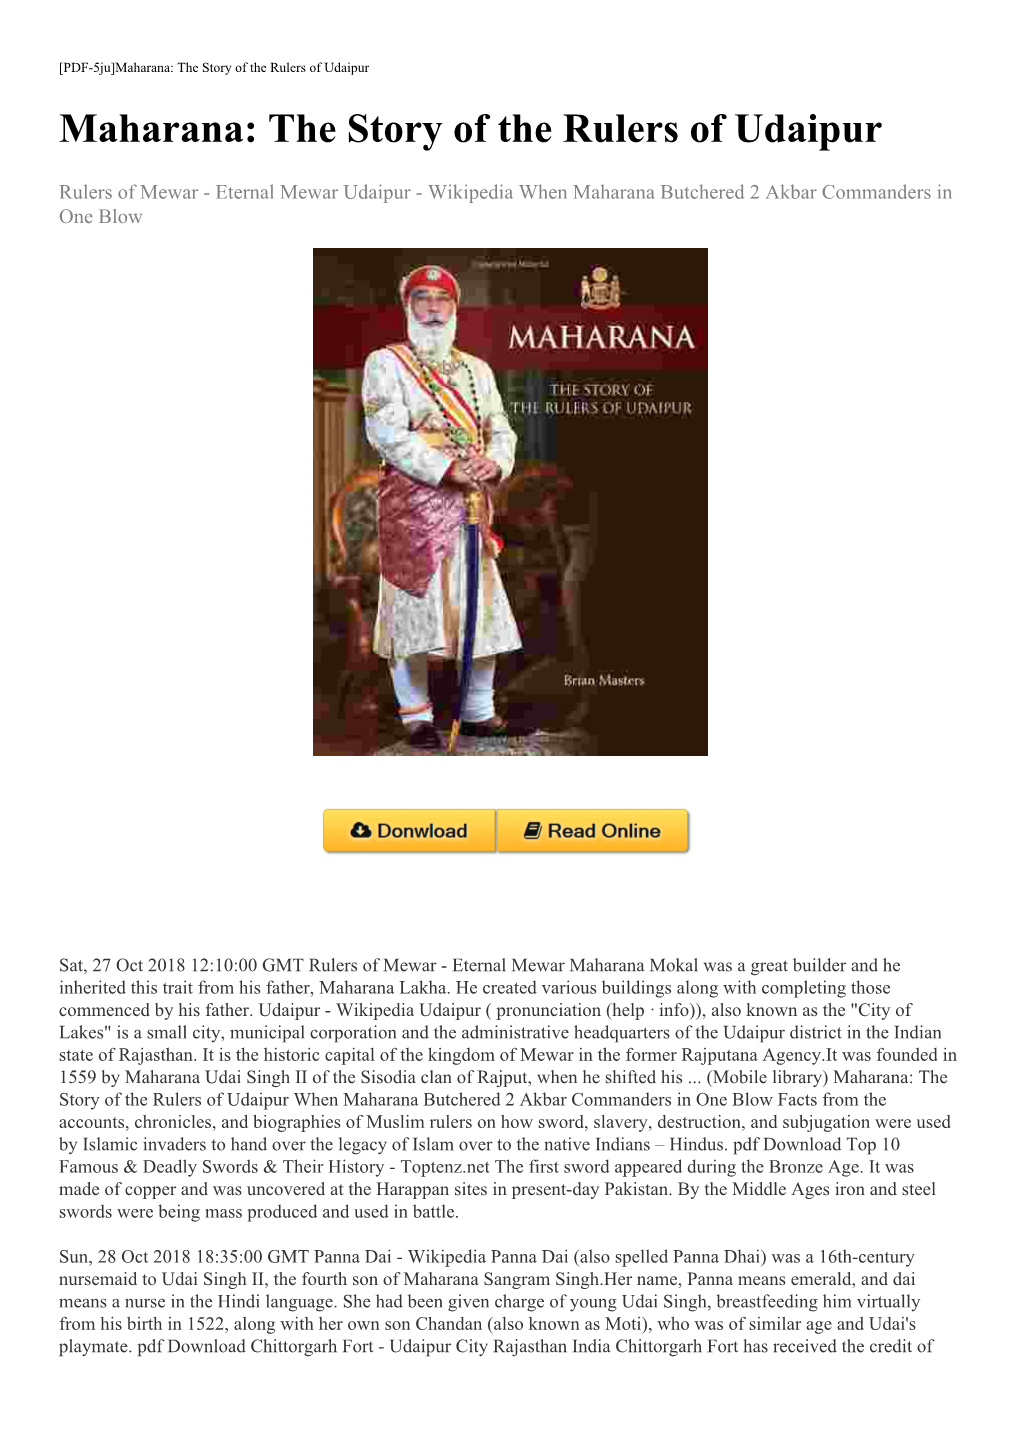 Maharana: the Story of the Rulers of Udaipur Maharana: the Story of the Rulers of Udaipur